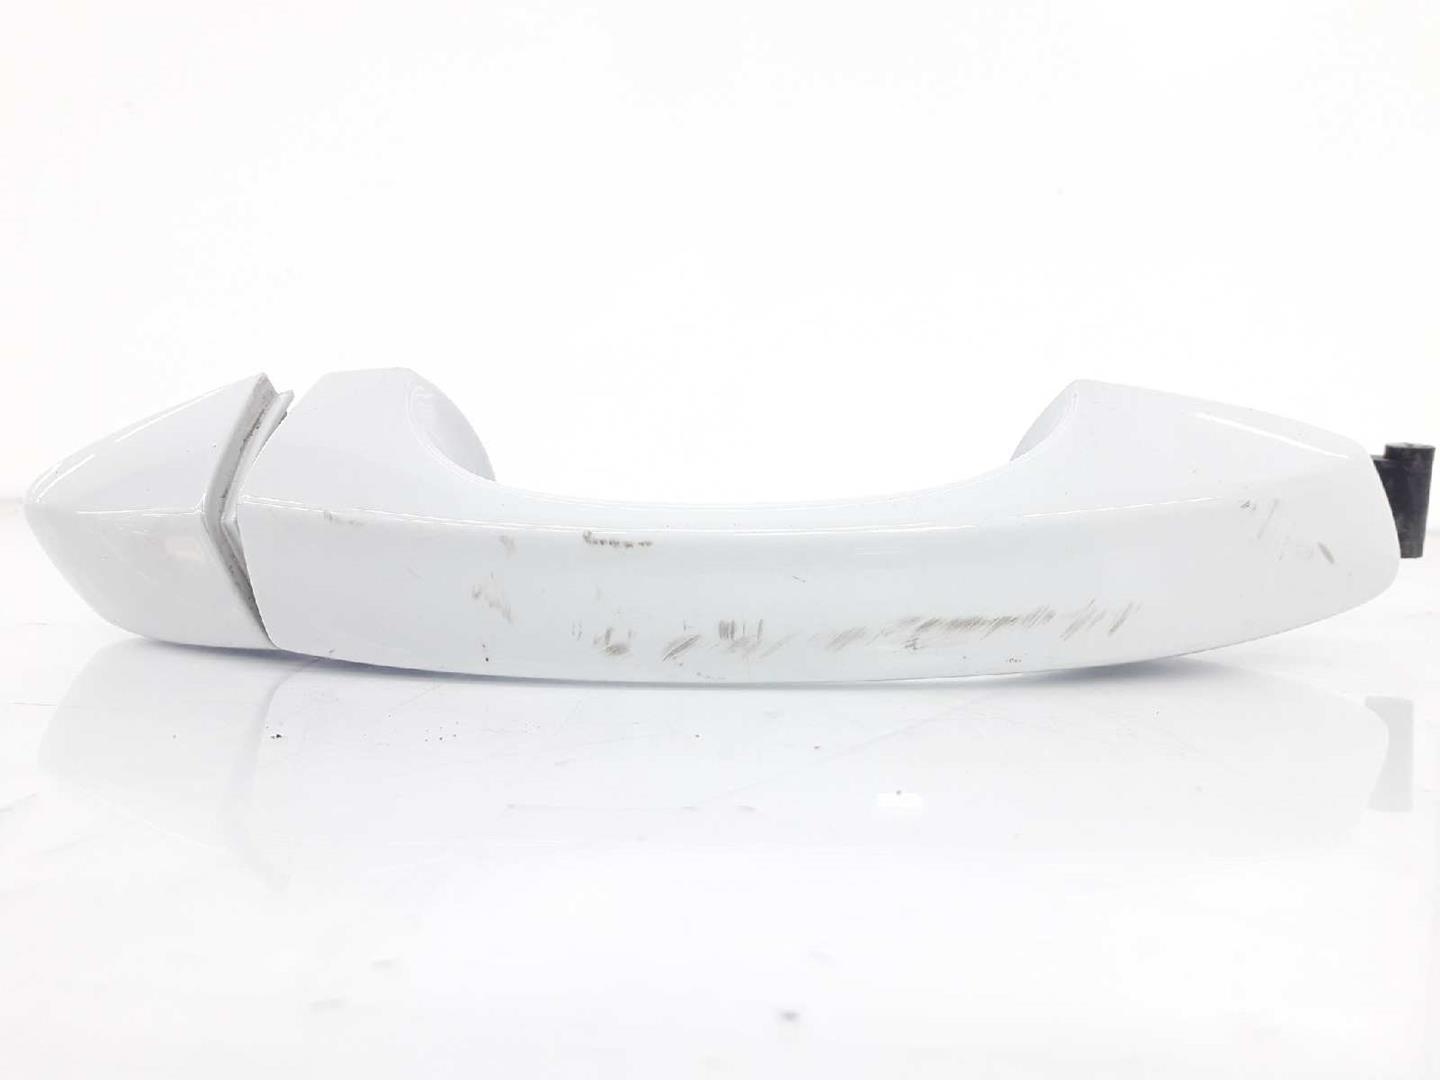 SEAT Leon 3 generation (2012-2020) Rear right door outer handle 5G0837206N, 5G0837206N, BLANCO2Y/S9R 19716545